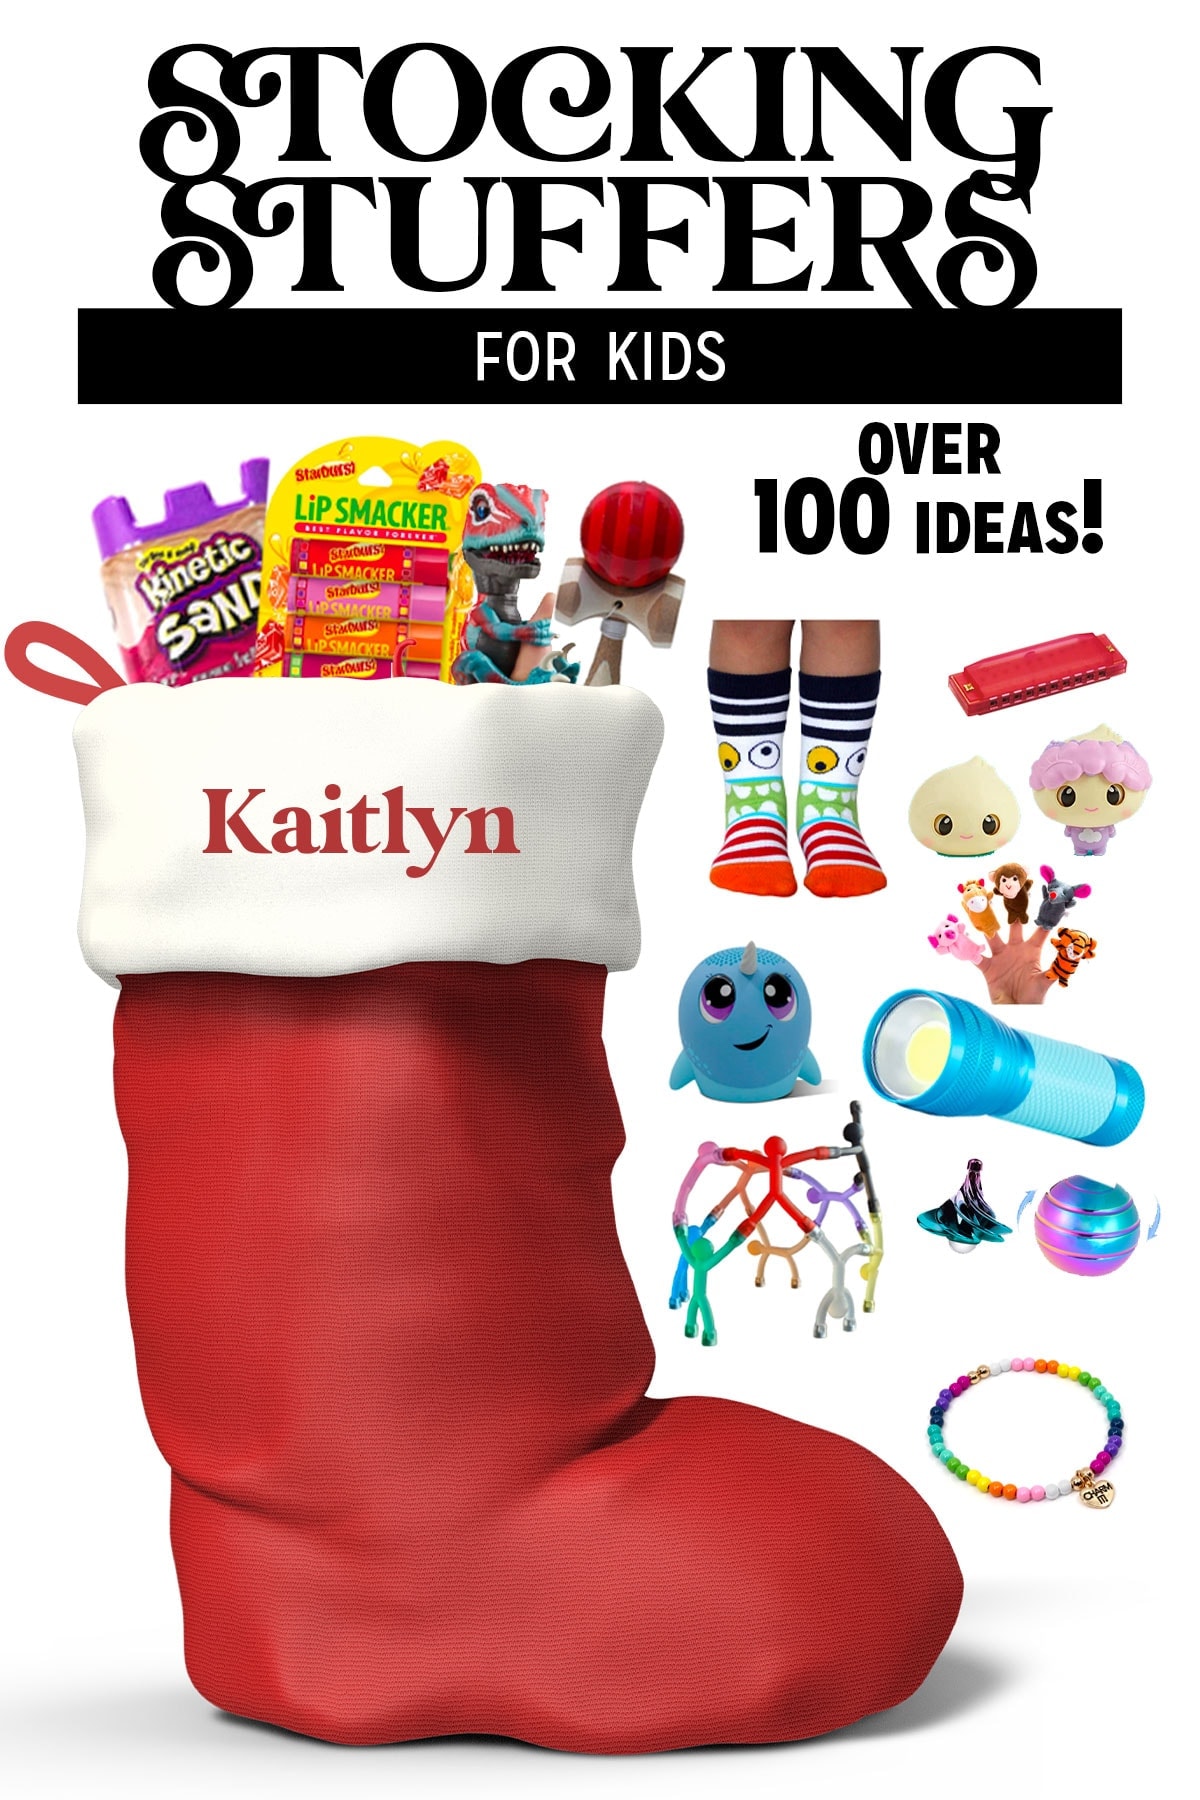 The Best Stocking Stuffer Ideas for the Whole Family!